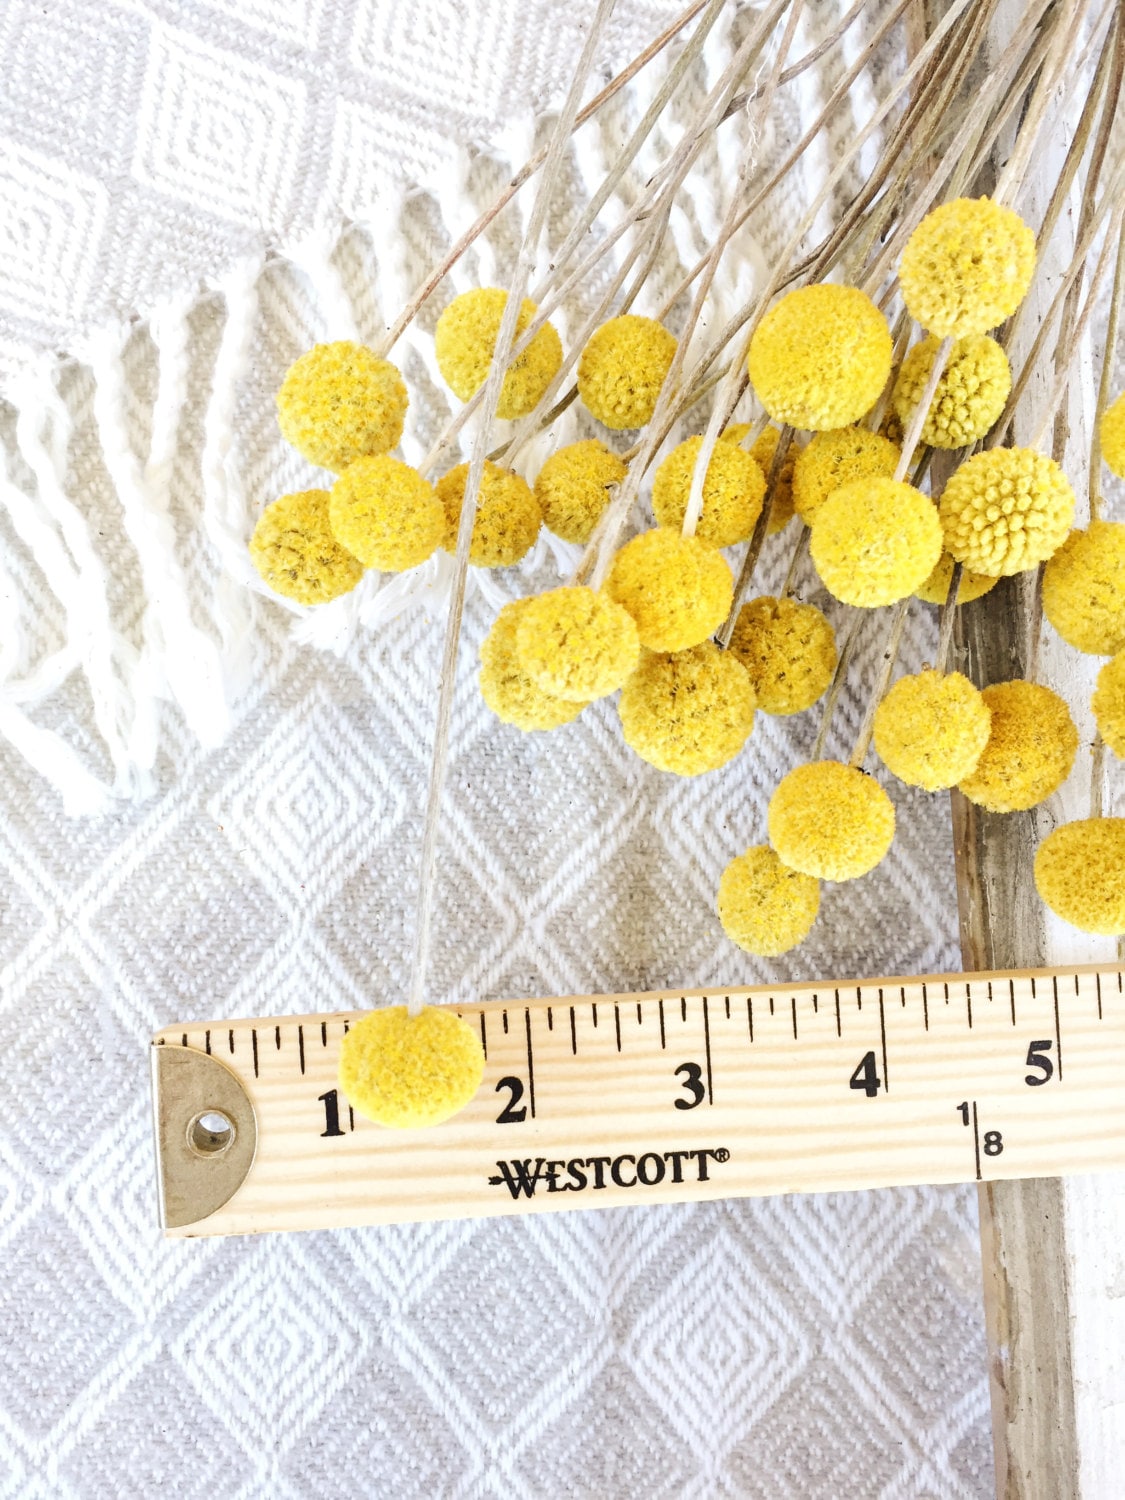 Dried Billy Balls, Craspedia Bunch, Drumstick Flower, Yellow Flowers, Dry Floral, Wedding Bouquet, Modern, Country Rustic Floral Arrangement